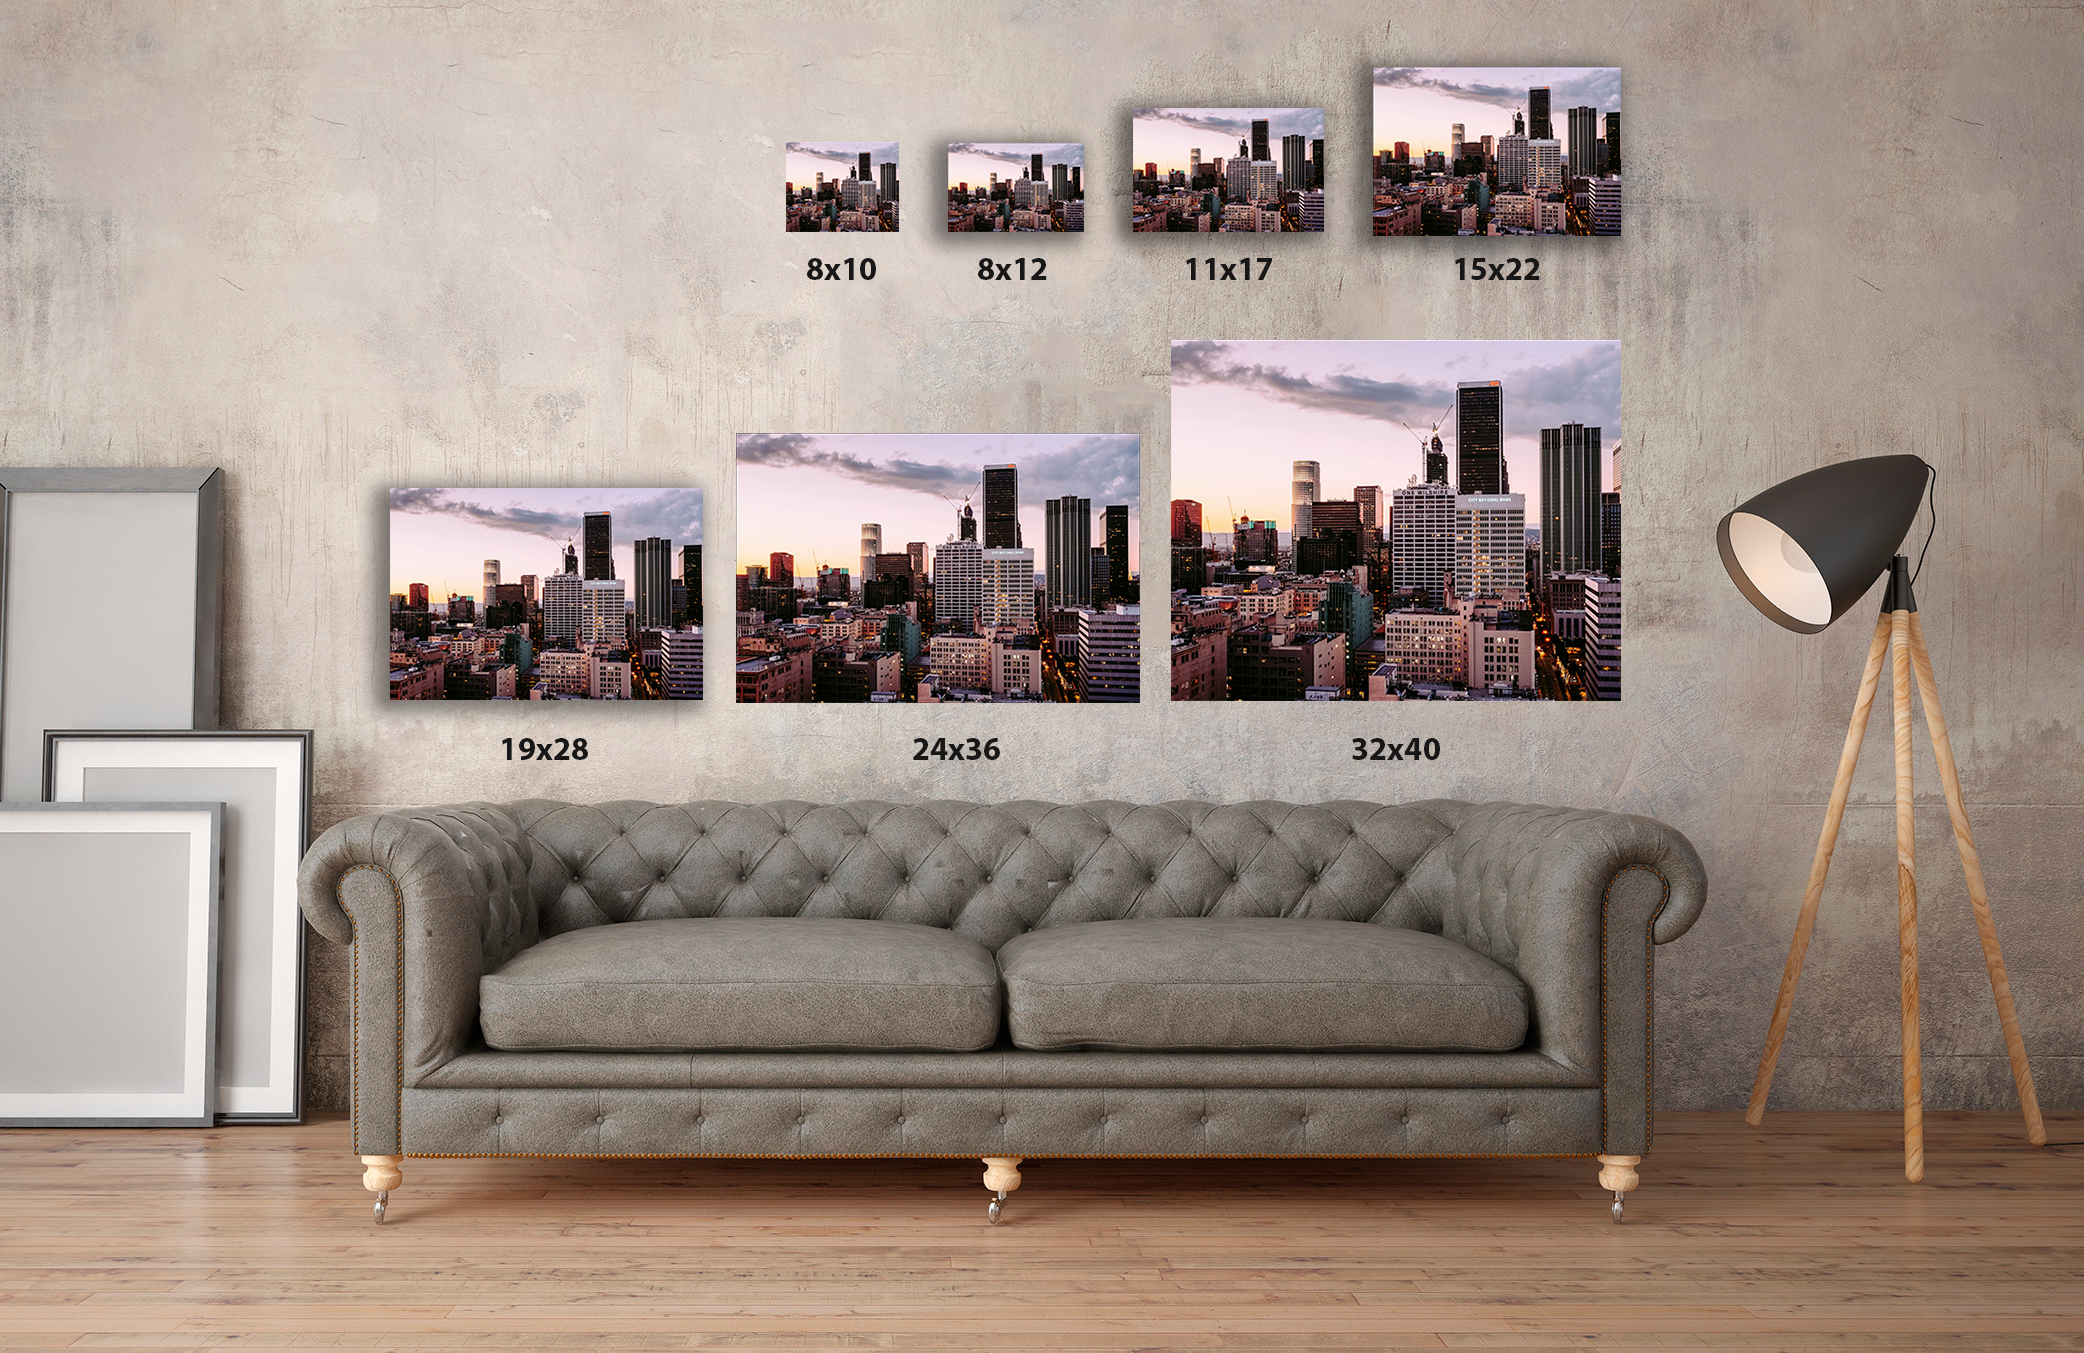 Awkward Styles Urban Poster Collection Urban Wall Art Los Angeles Unframed Artwork LA Poster Decor Los Angeles Cityscape Evening in LA Printed Decor LA Photo Prints LA Cityscape Poster Wall Art - image 3 of 3